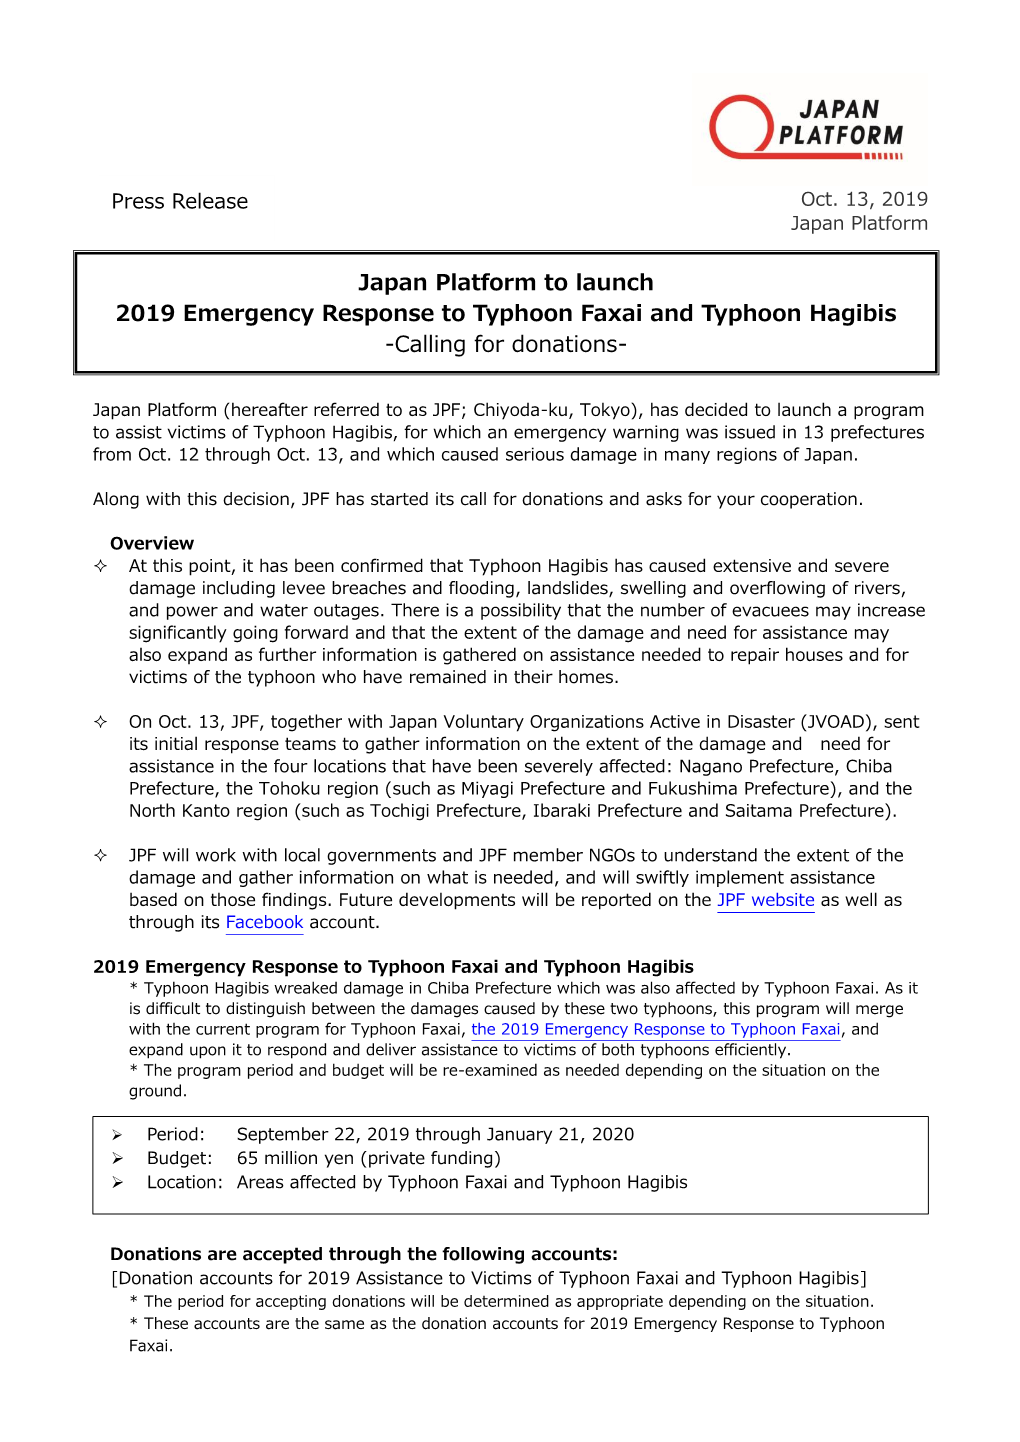 Japan Platform to Launch 2019 Emergency Response to Typhoon Faxai and Typhoon Hagibis -Calling for Donations